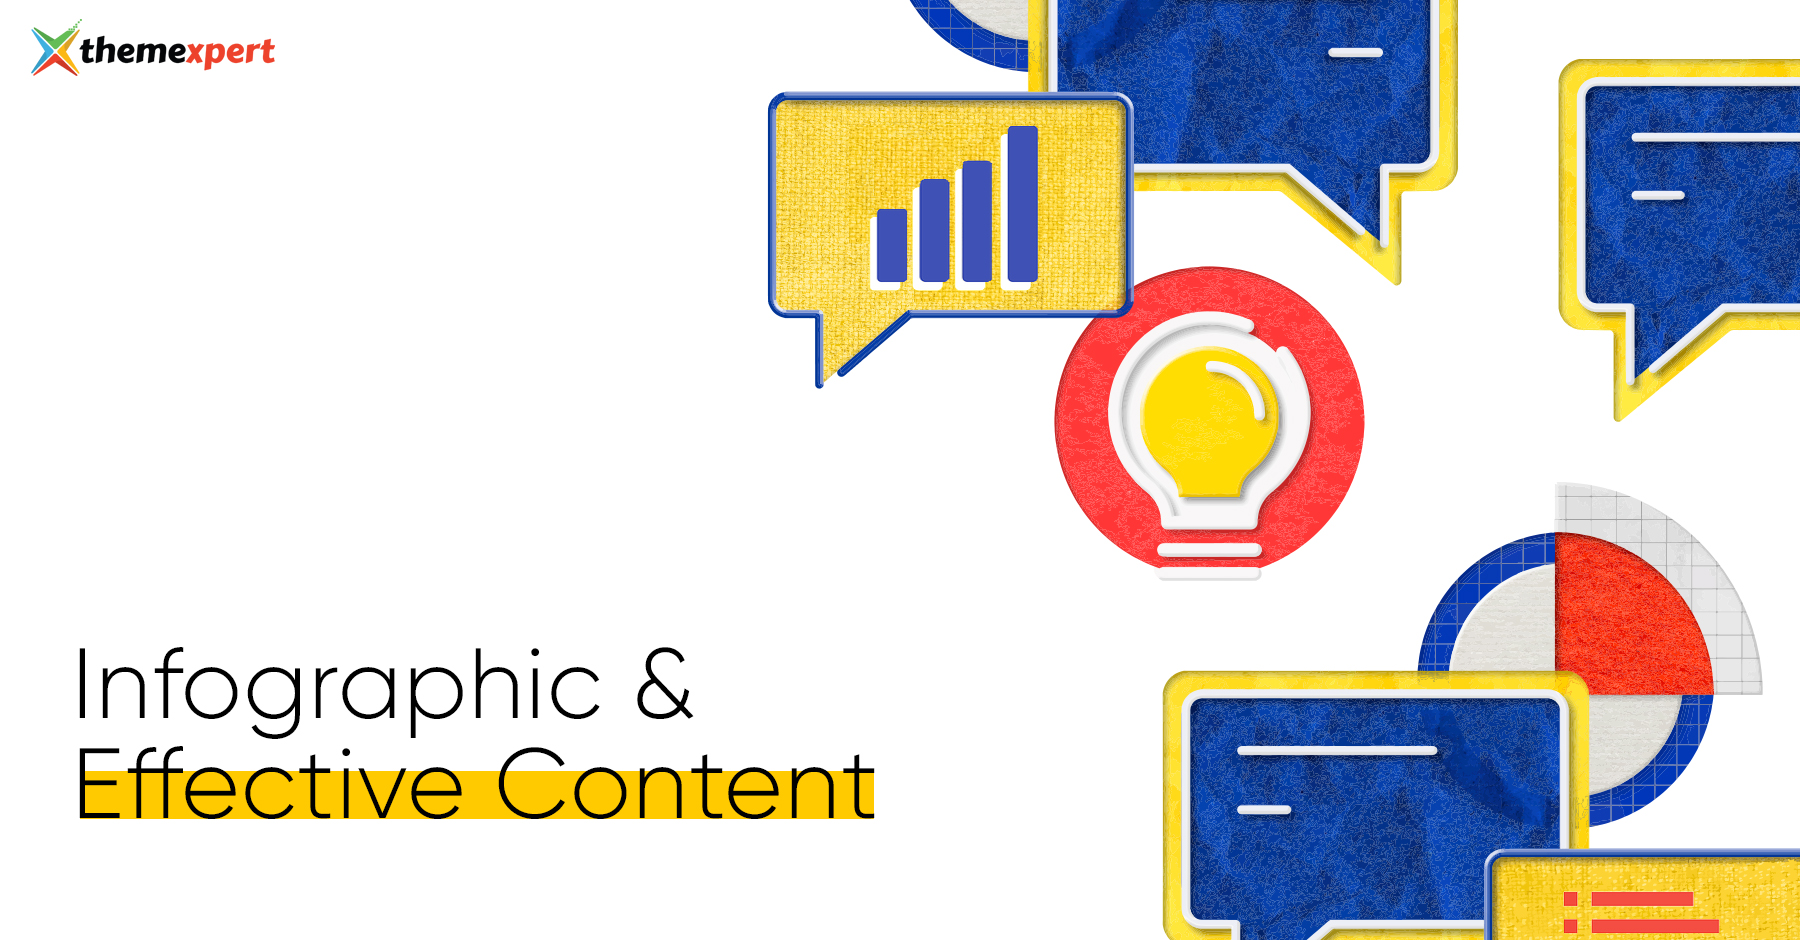 How Infographic and Effective Content Strategy can Boost Your Online Business